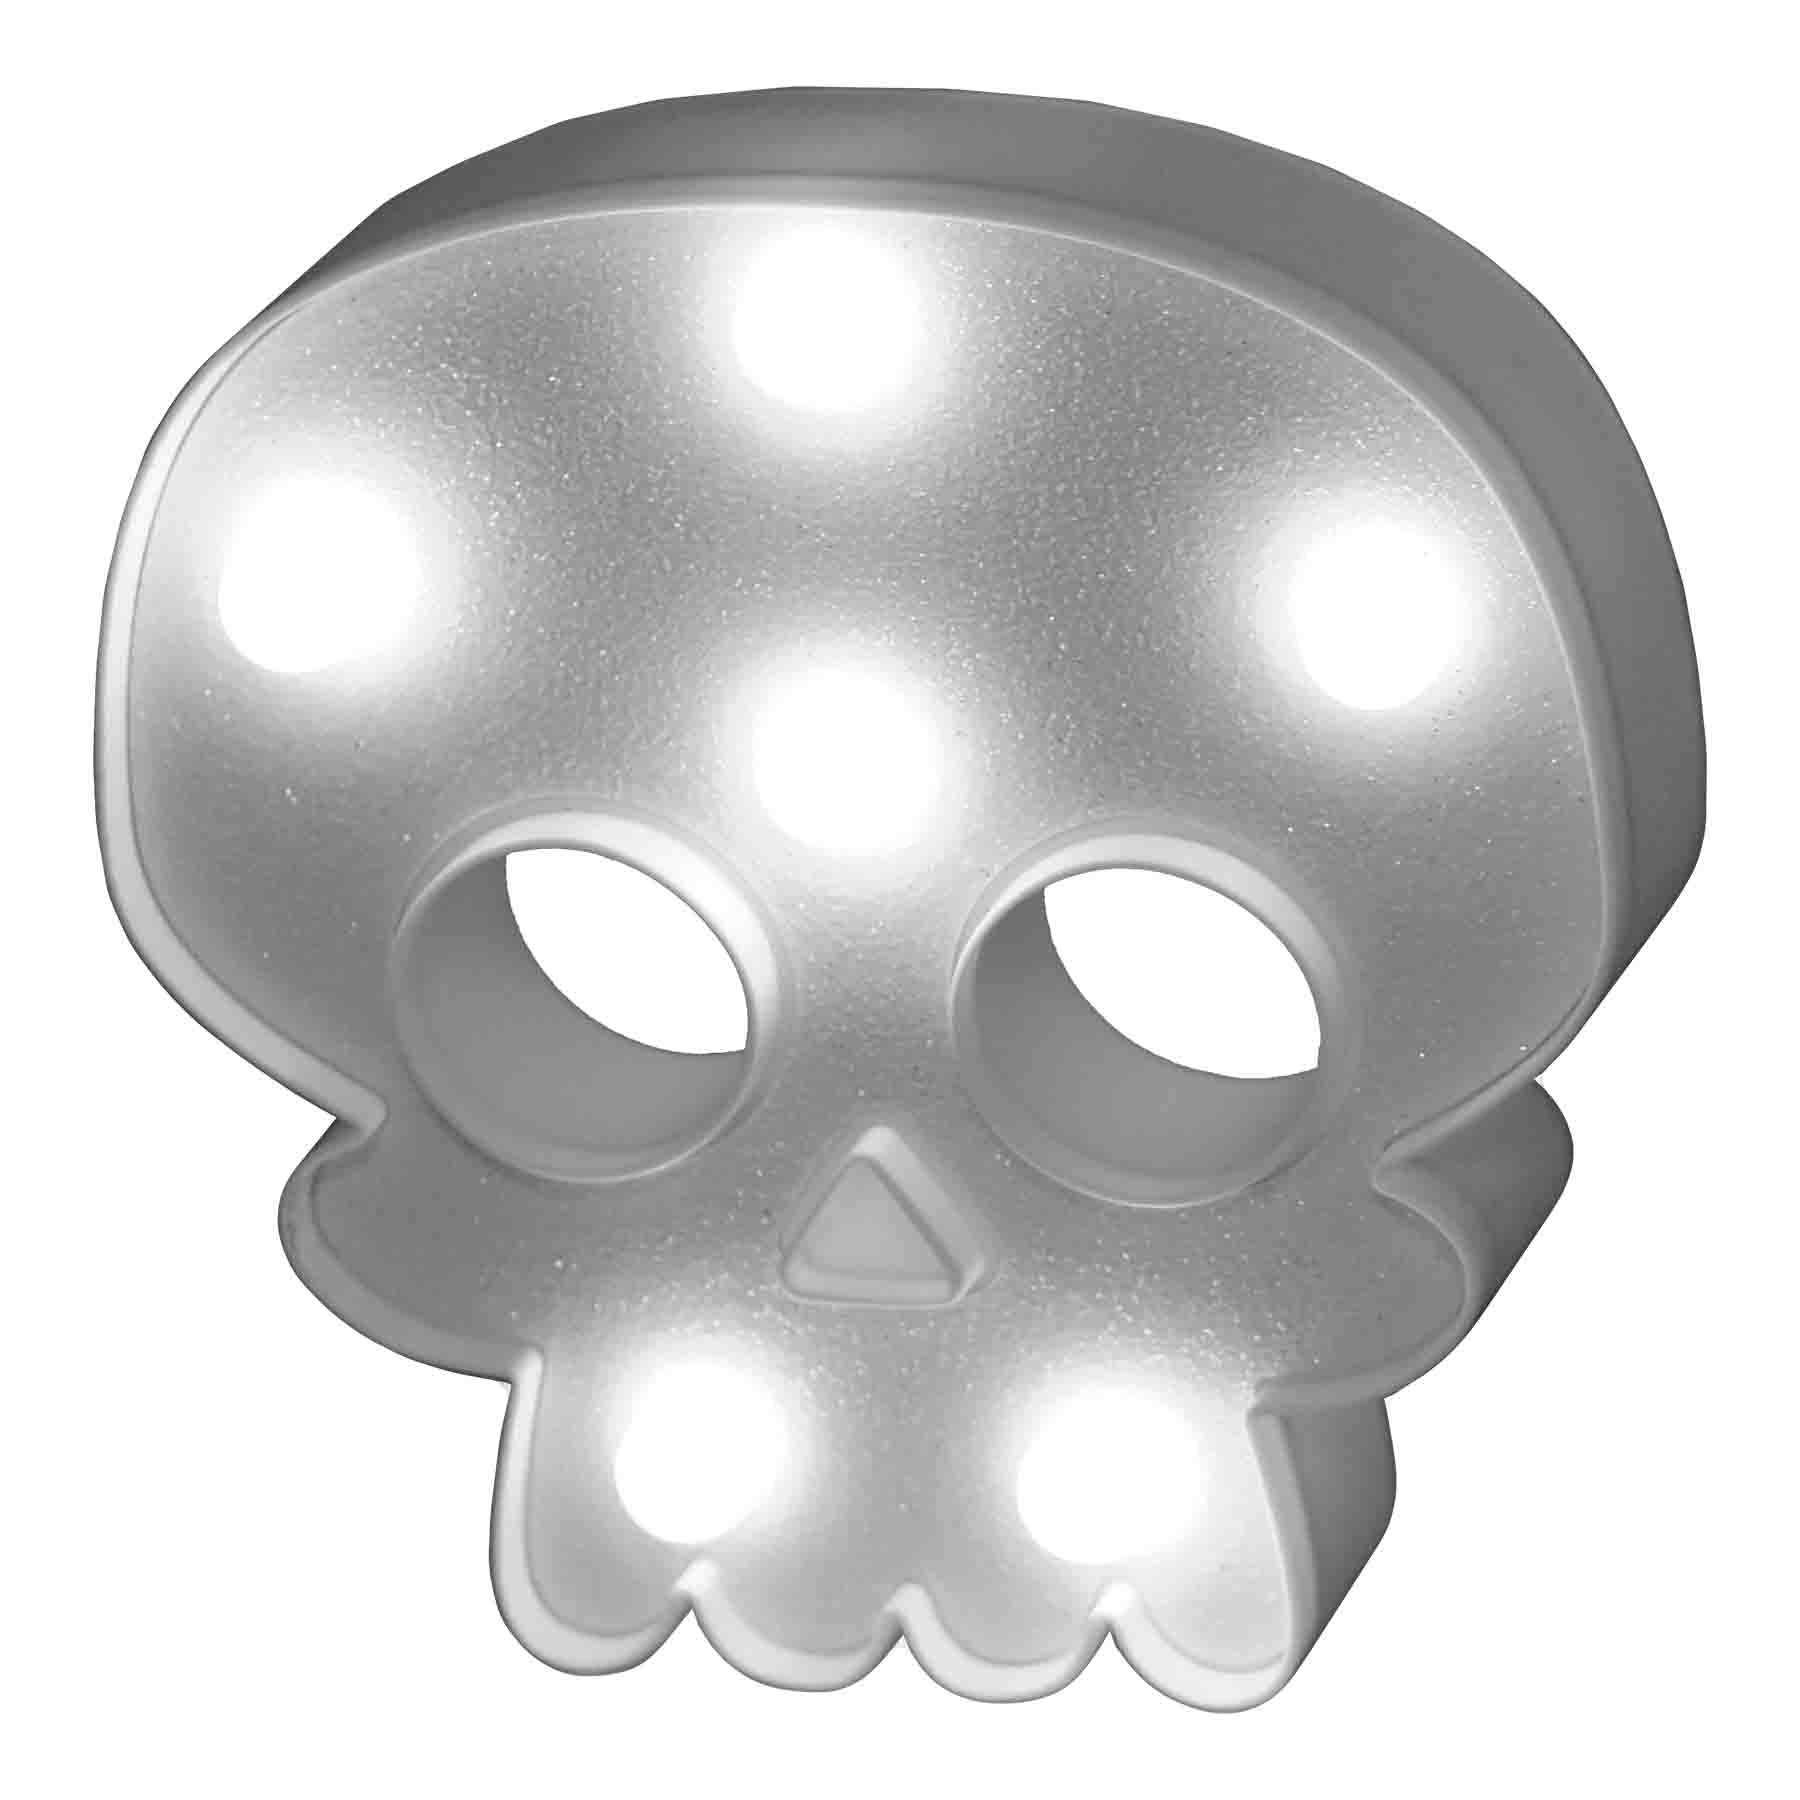 702929-SpookyDecor Skull LoRes